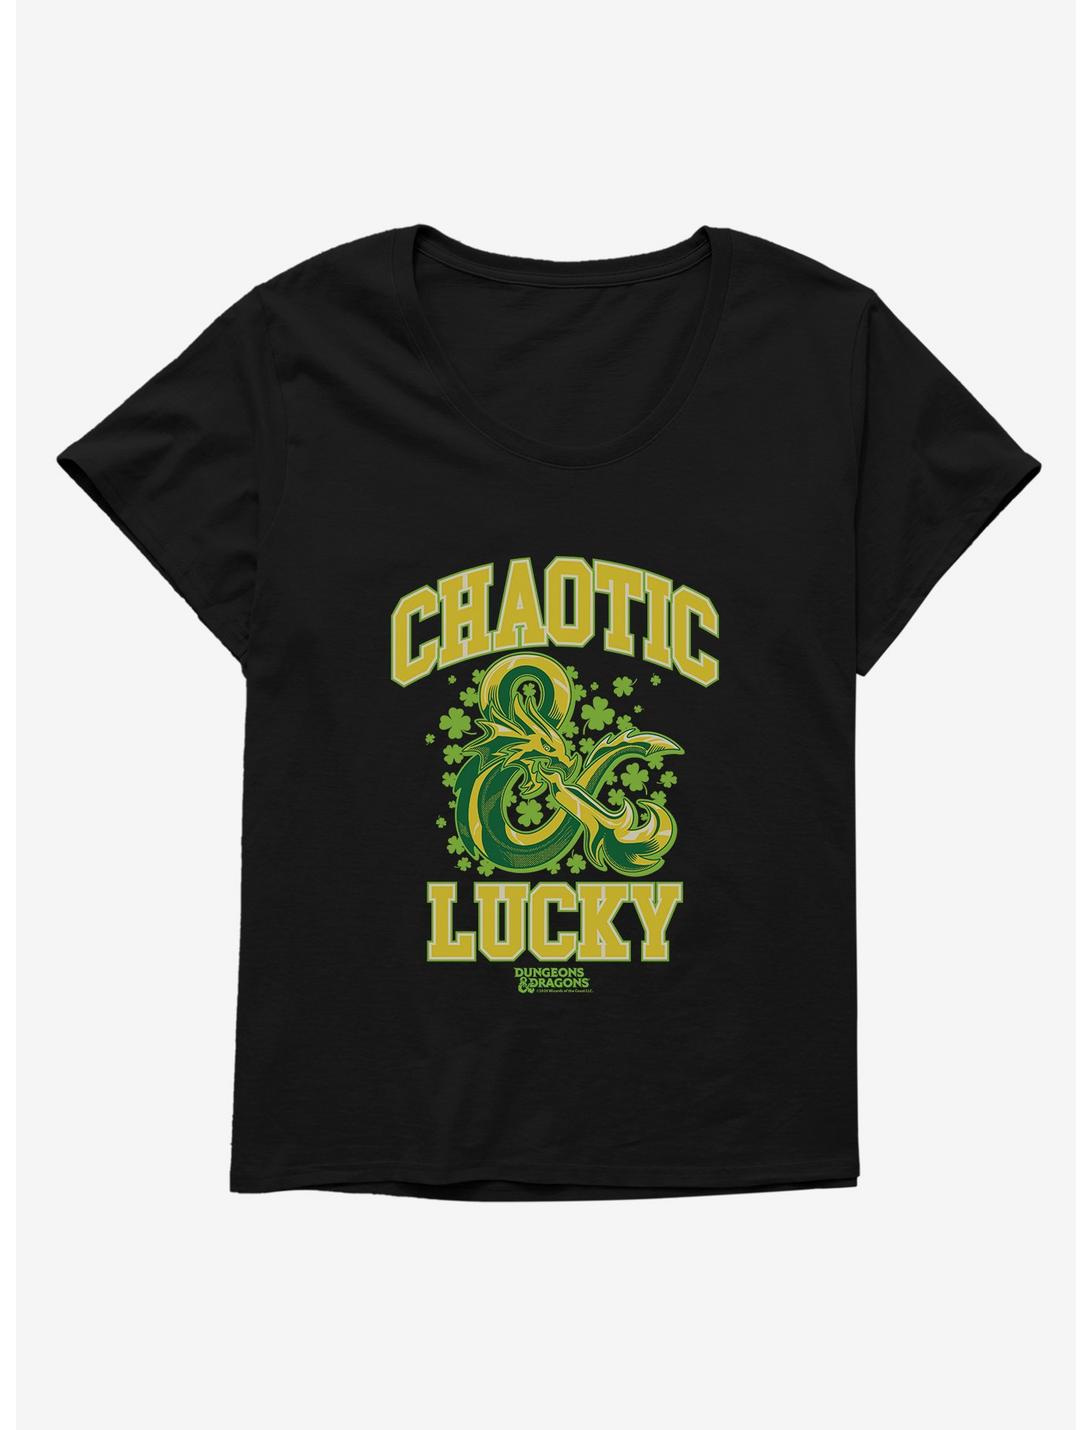 Dungeons & Dragons Chaotic And Lucky Girls T-Shirt Plus Size, BLACK, hi-res